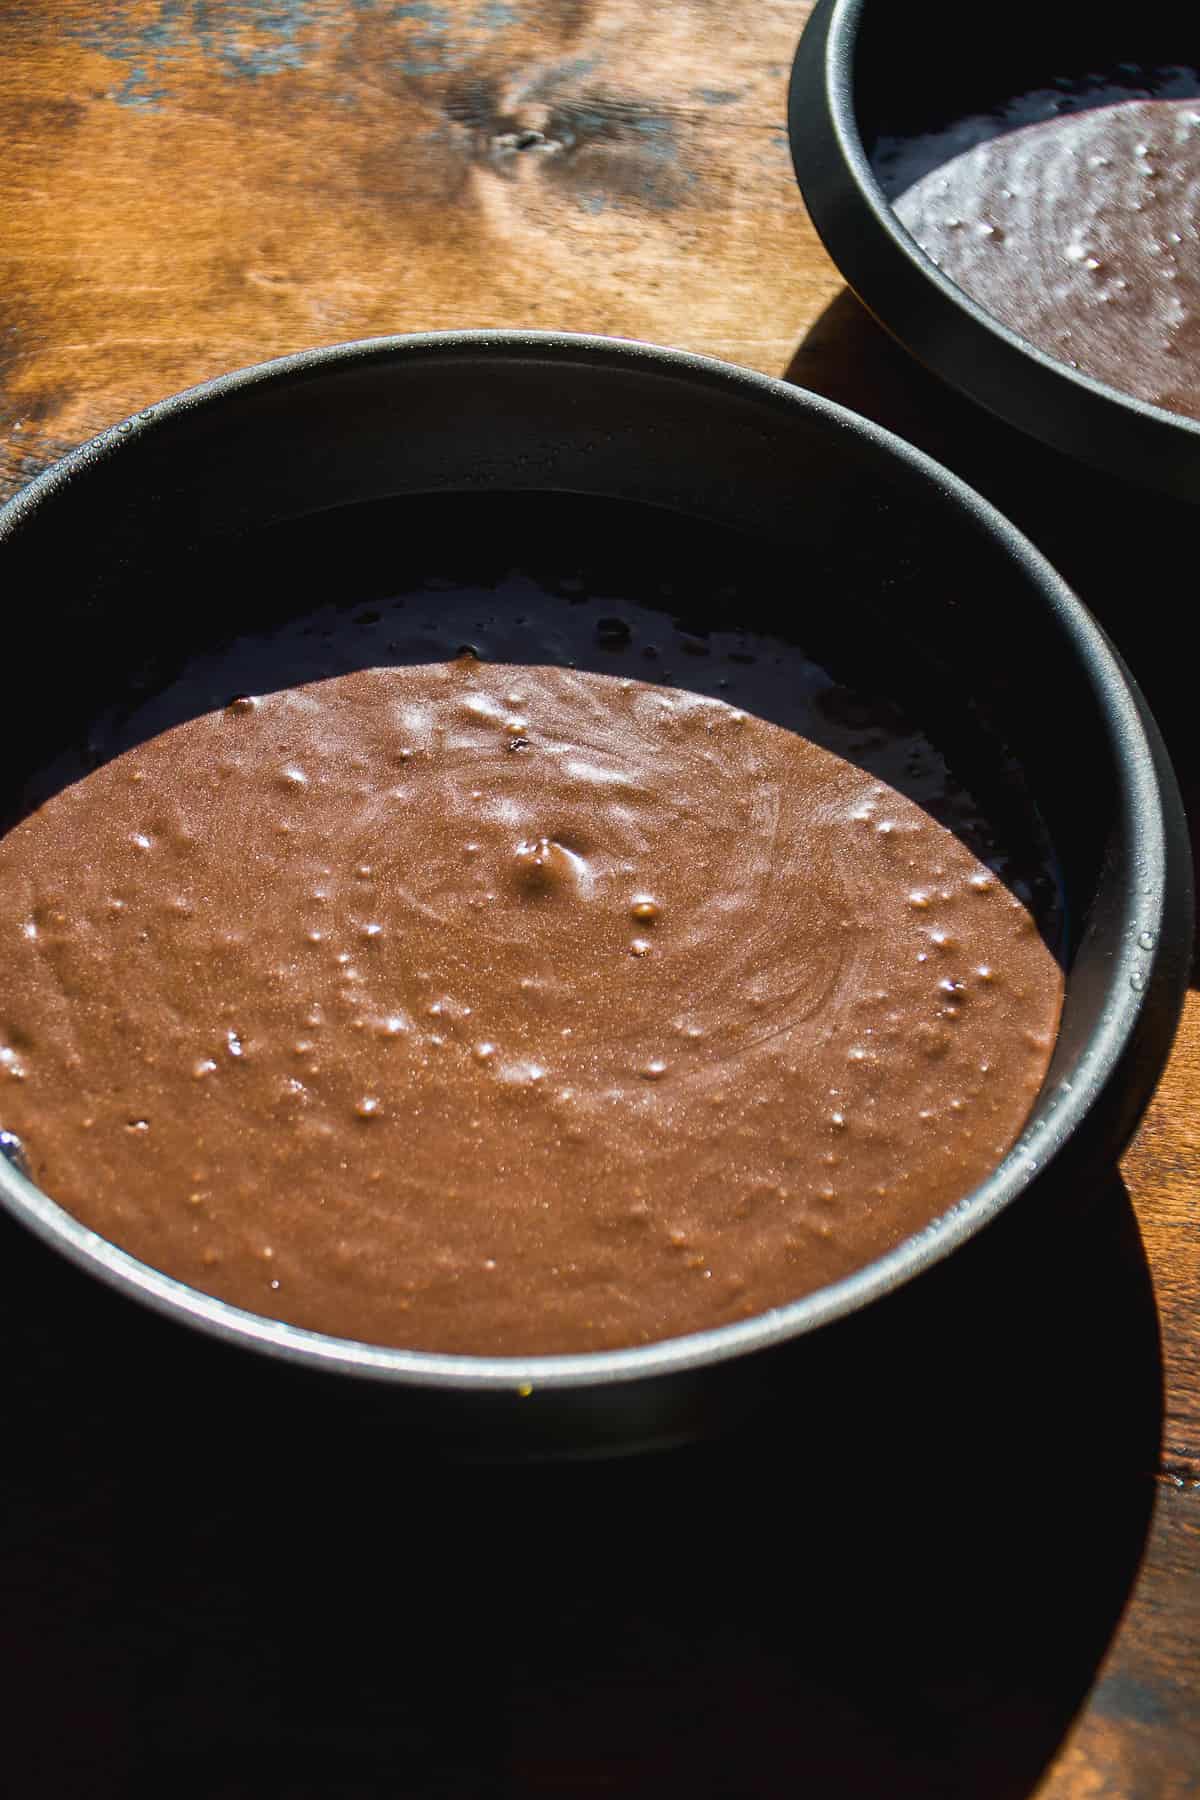 Chocolate orange cake batter about to be baked in a pan.